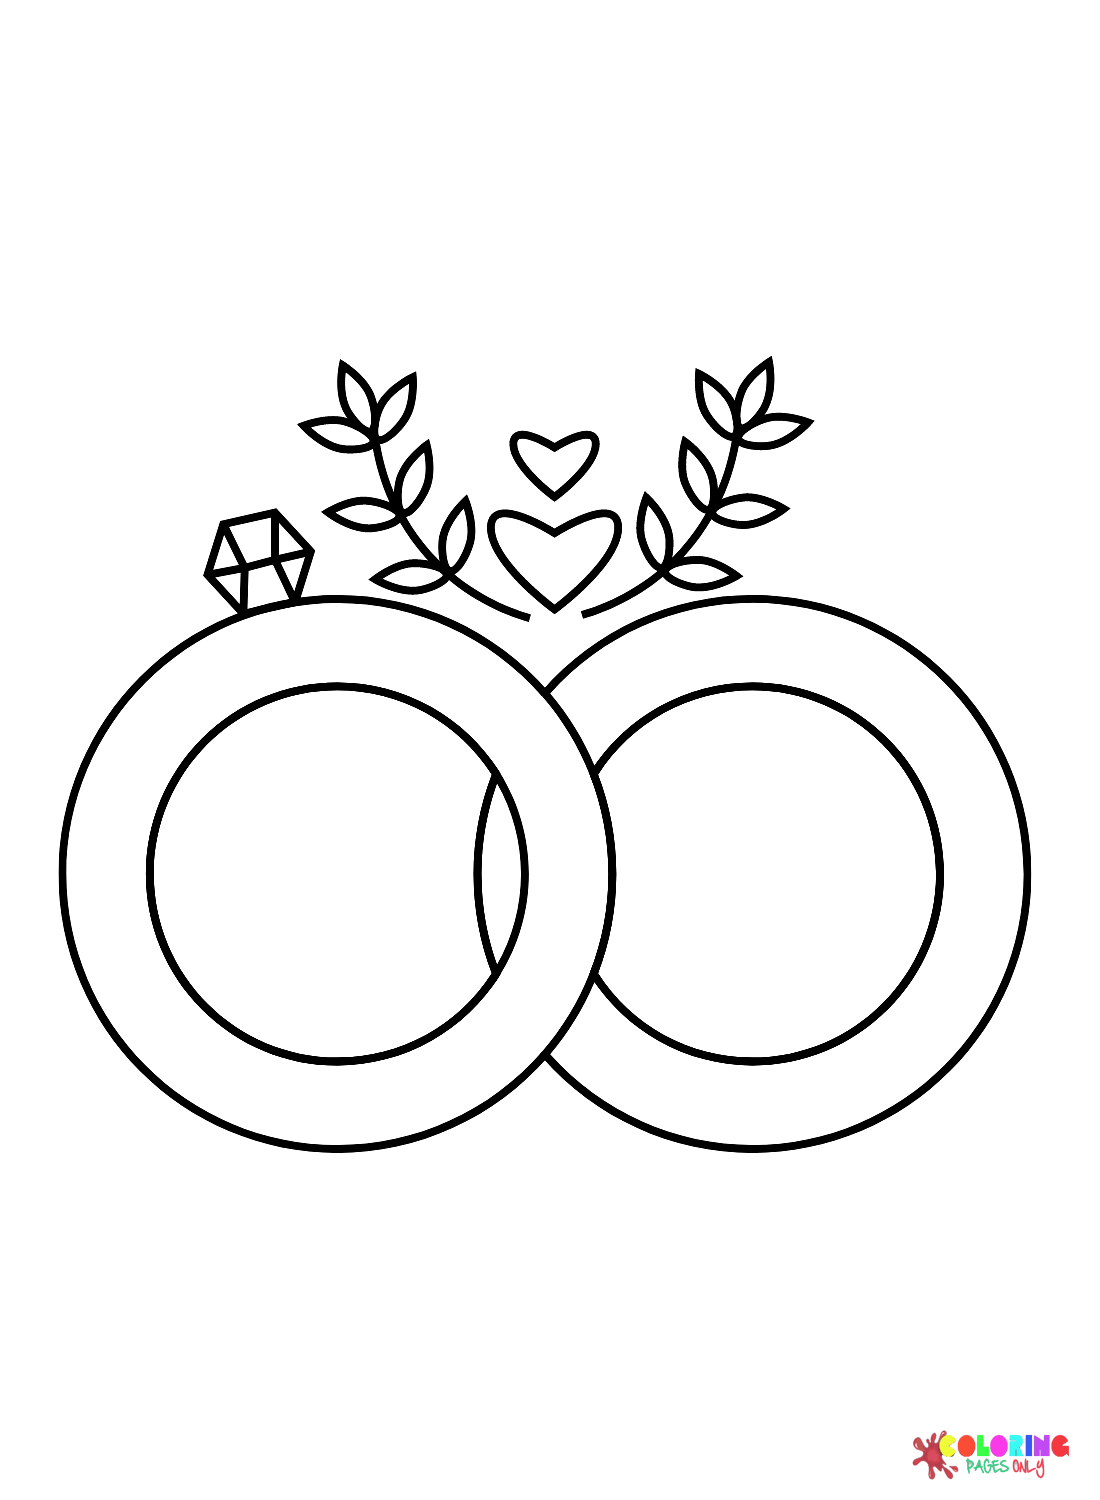 Wedding Rings Love Coloring Pages - Wedding Ring Coloring Pages - Coloring  Pages For Kids And Adults